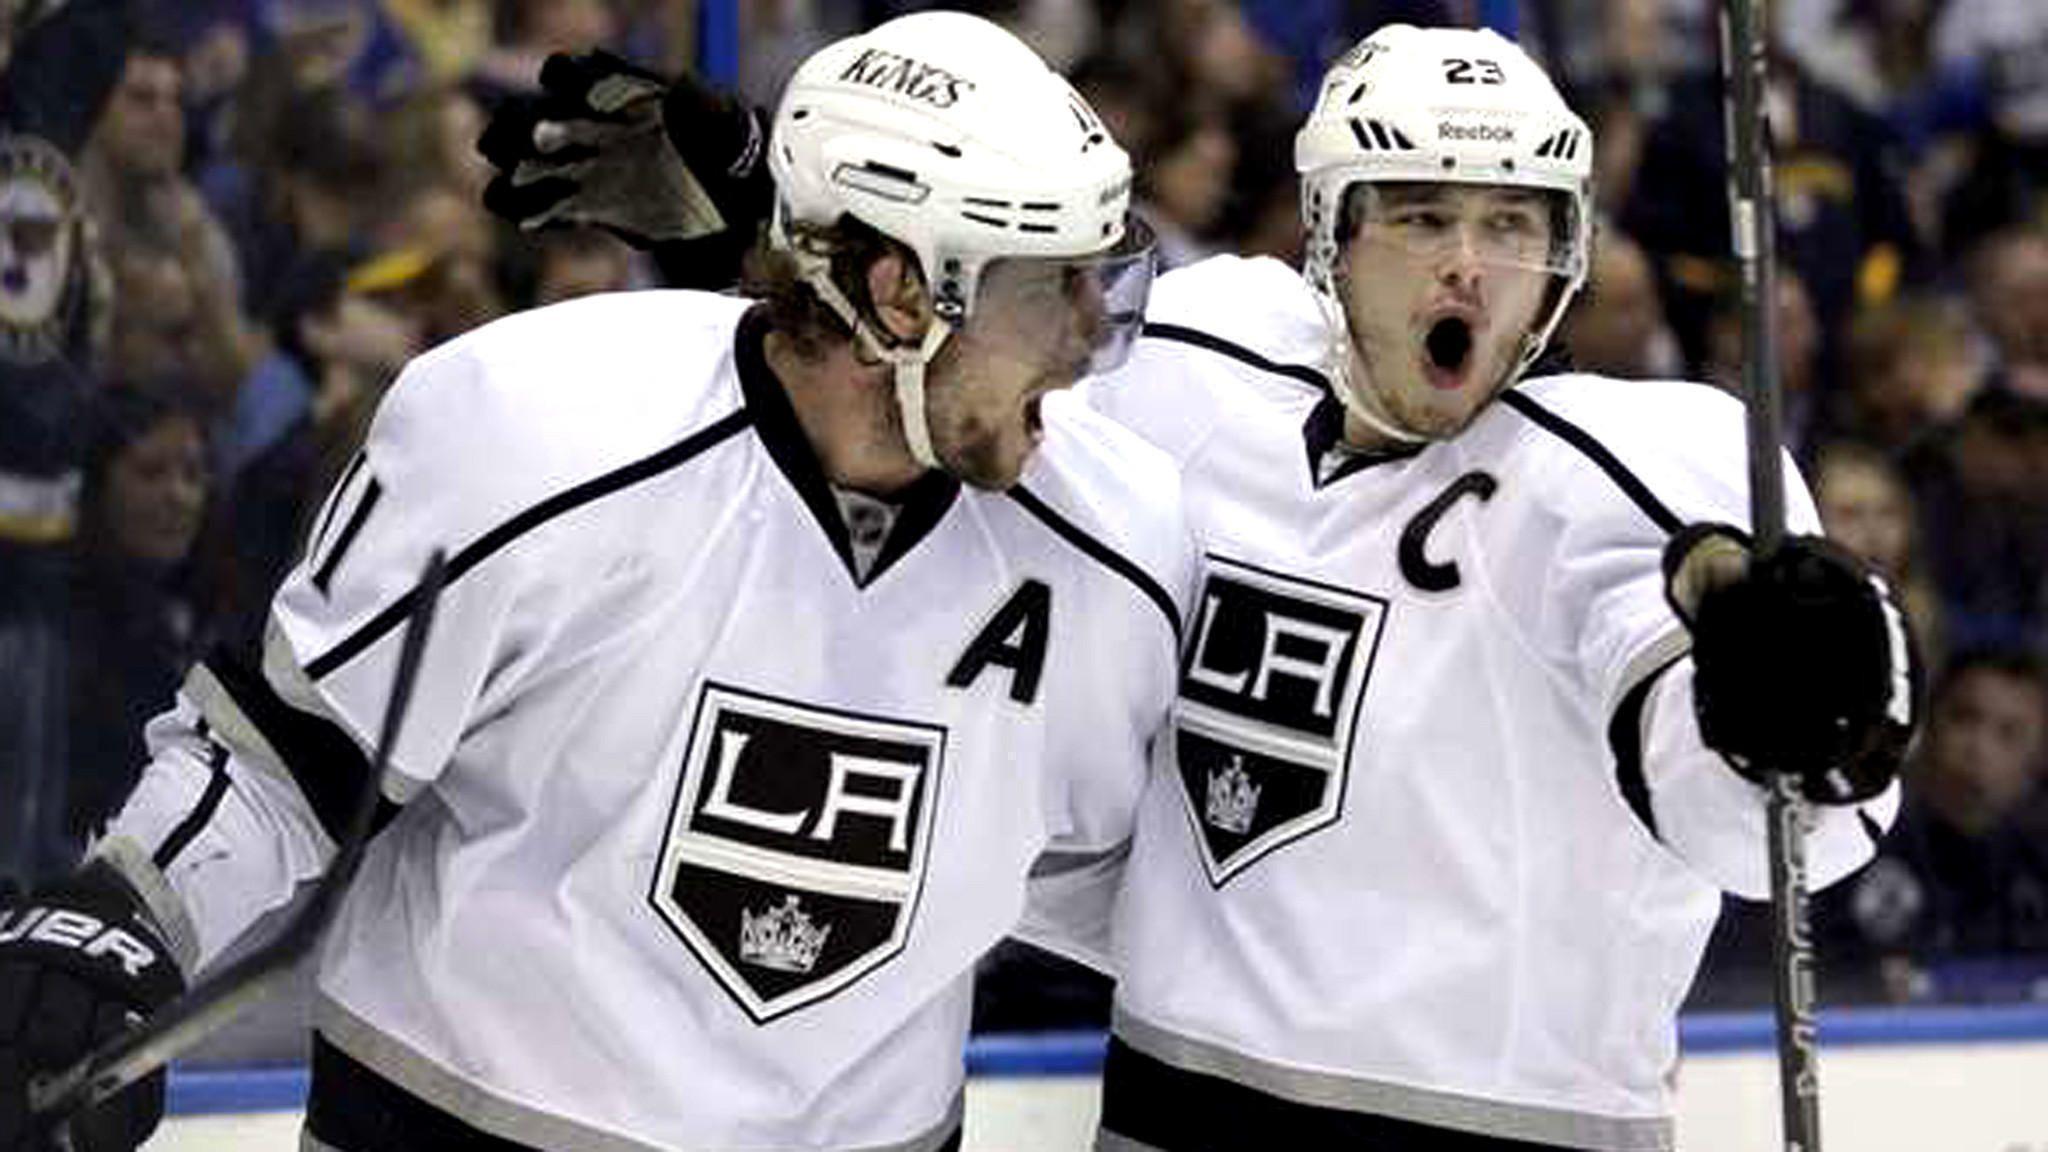 Anze Kopitar may be in, and Dustin Brown out, as Kings captain